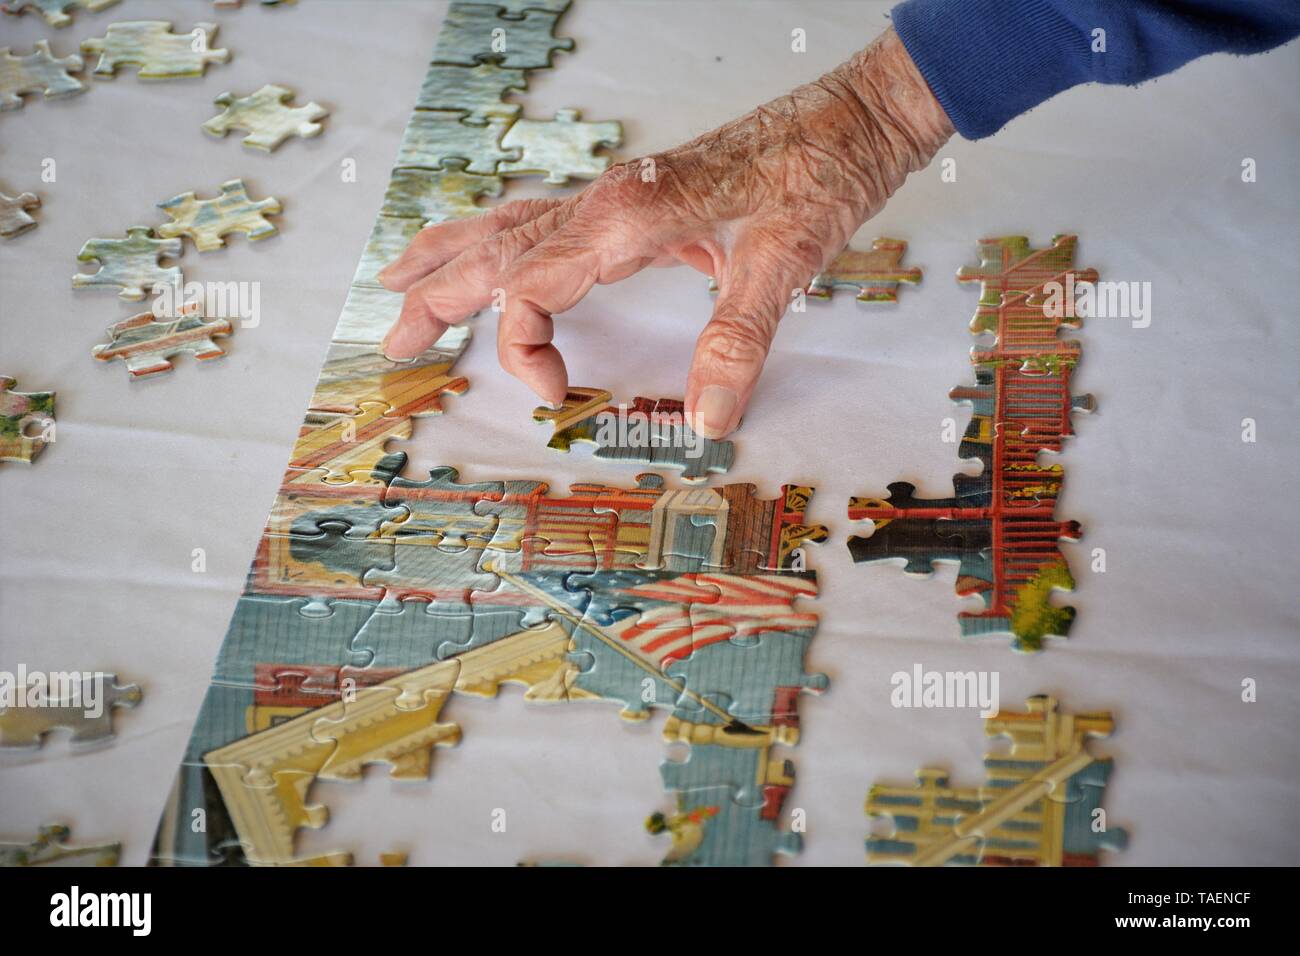 Senior hands working at a real family reunion in California USA America with 4 generations together Stock Photo